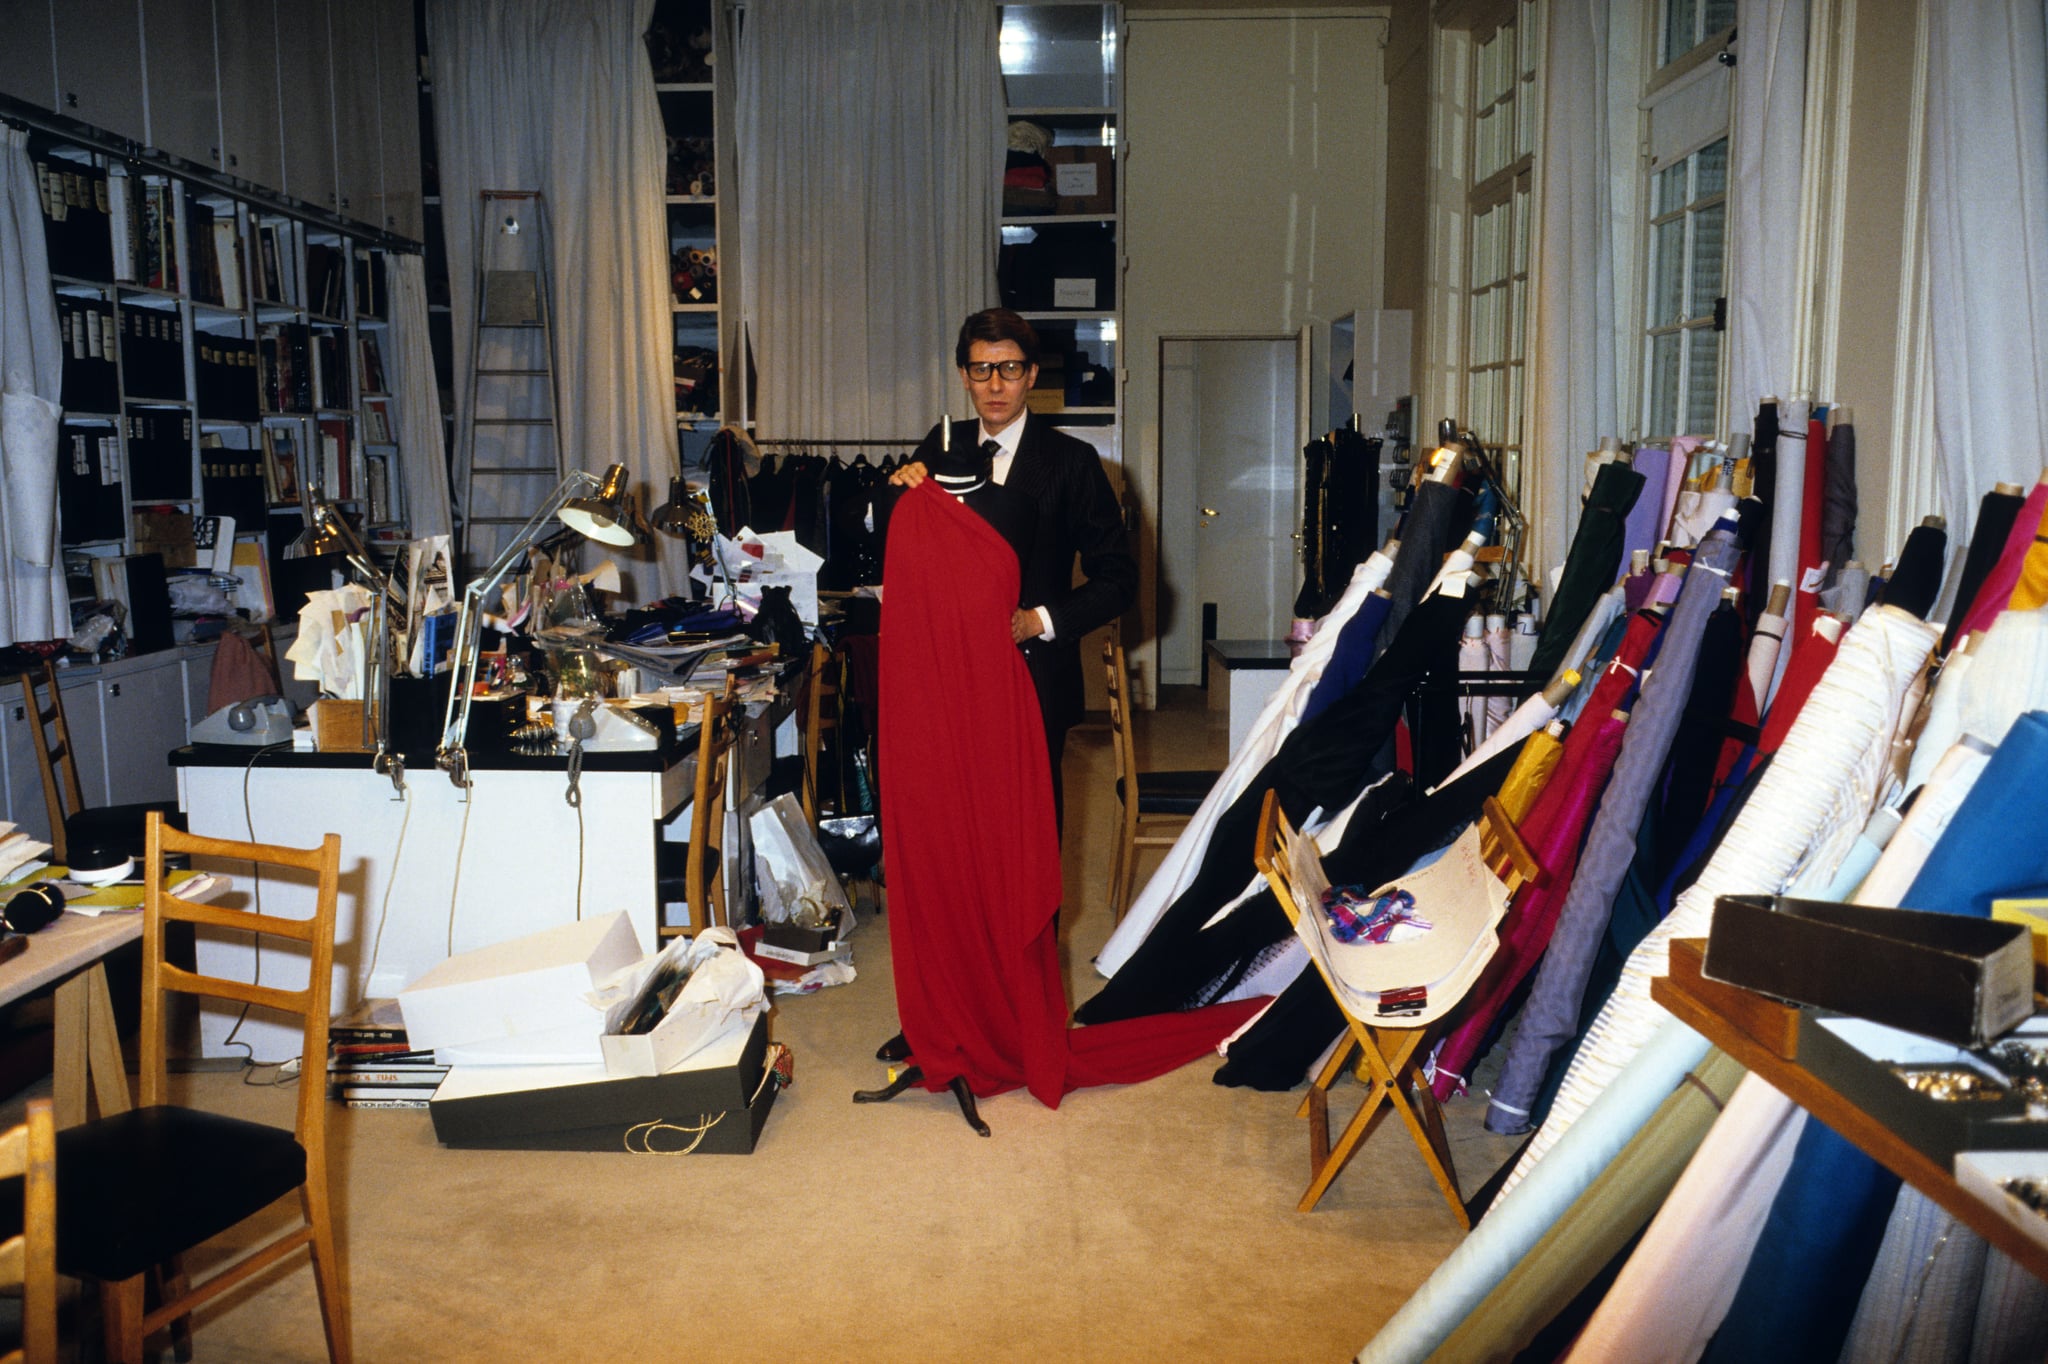 Yves Saint Laurent showed off his wares at his atelier in 1982. 